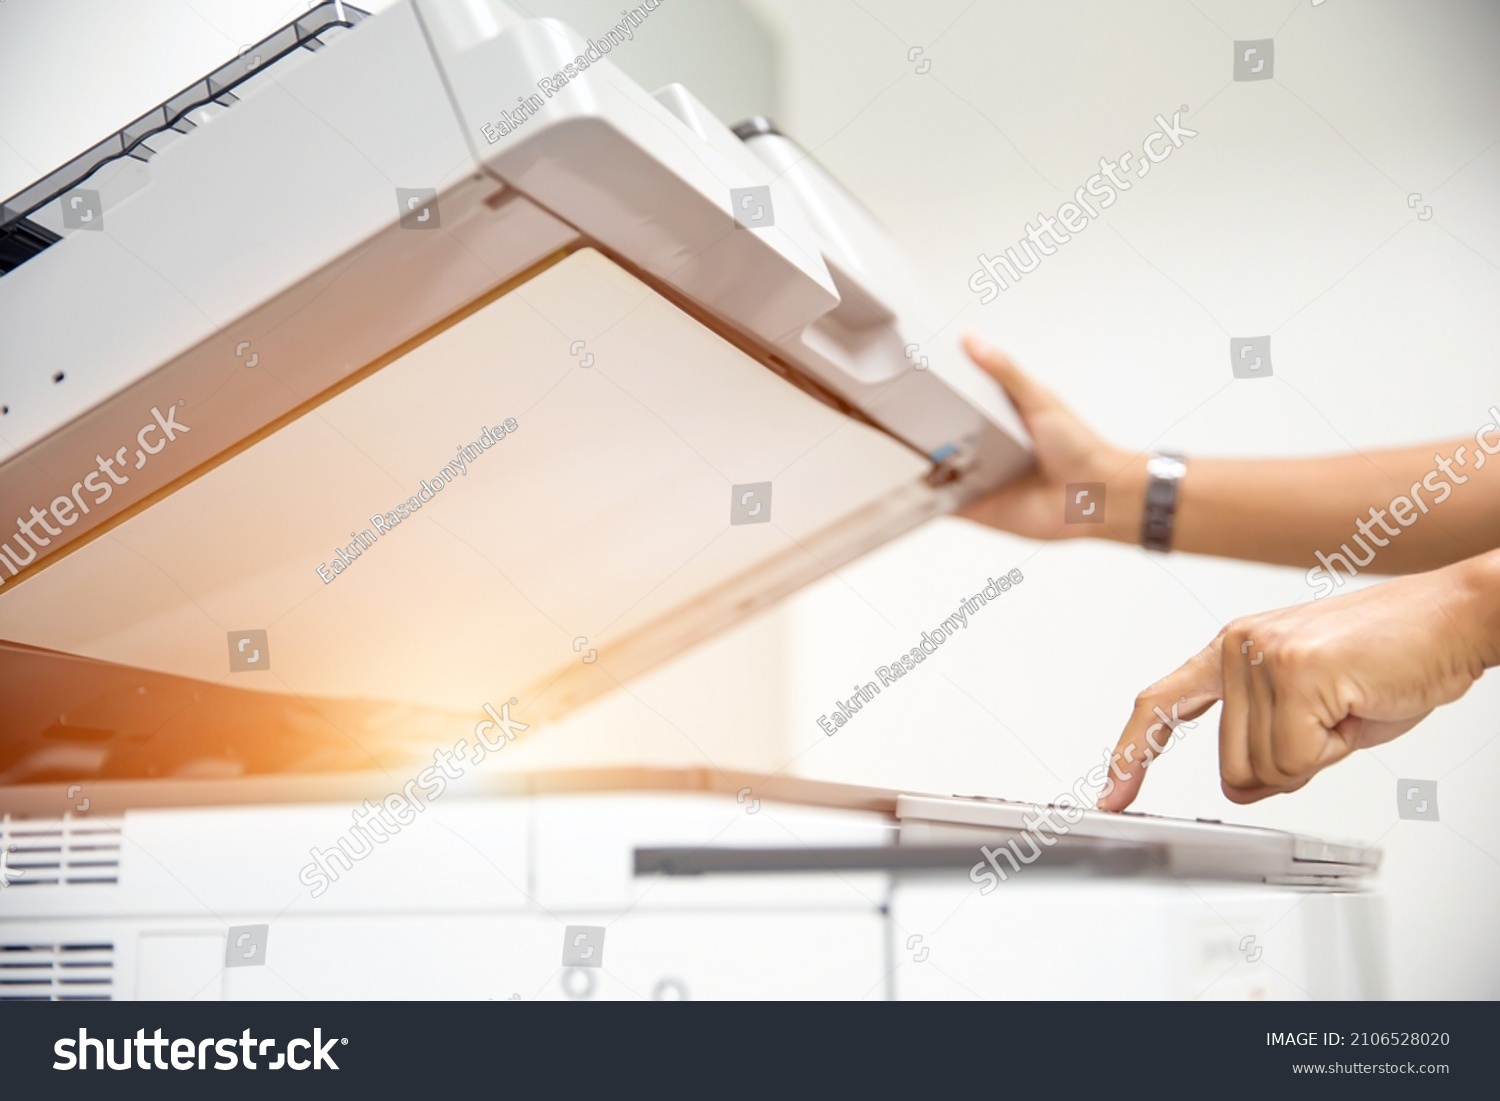 Copier printer, Close up hand office man press copy button on panel to using the copier or photocopier machine for scanning document printing a sheet paper and xerox photocopy. #2106528020